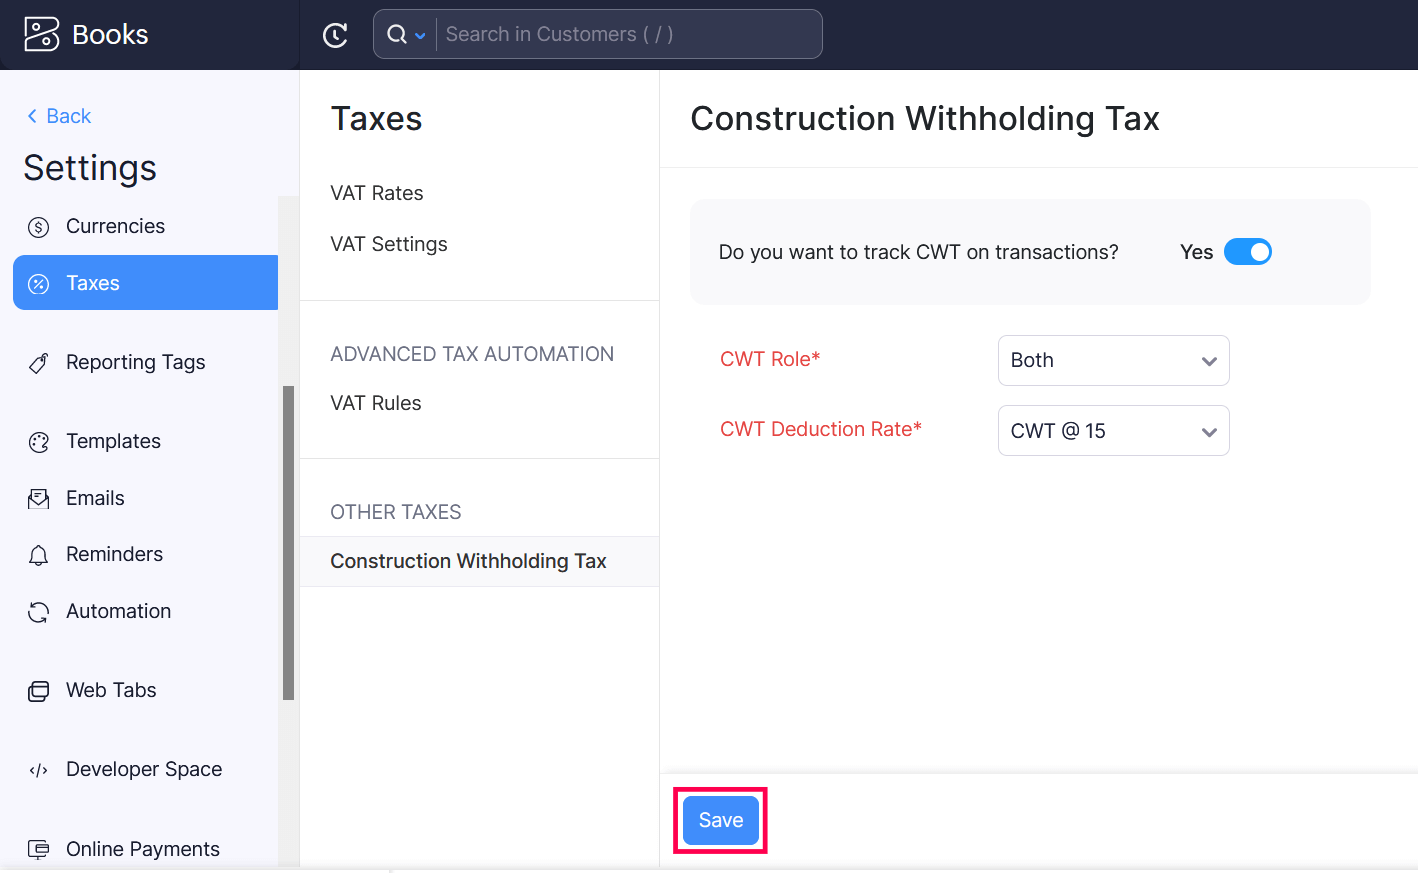 Construction Withholding Tax